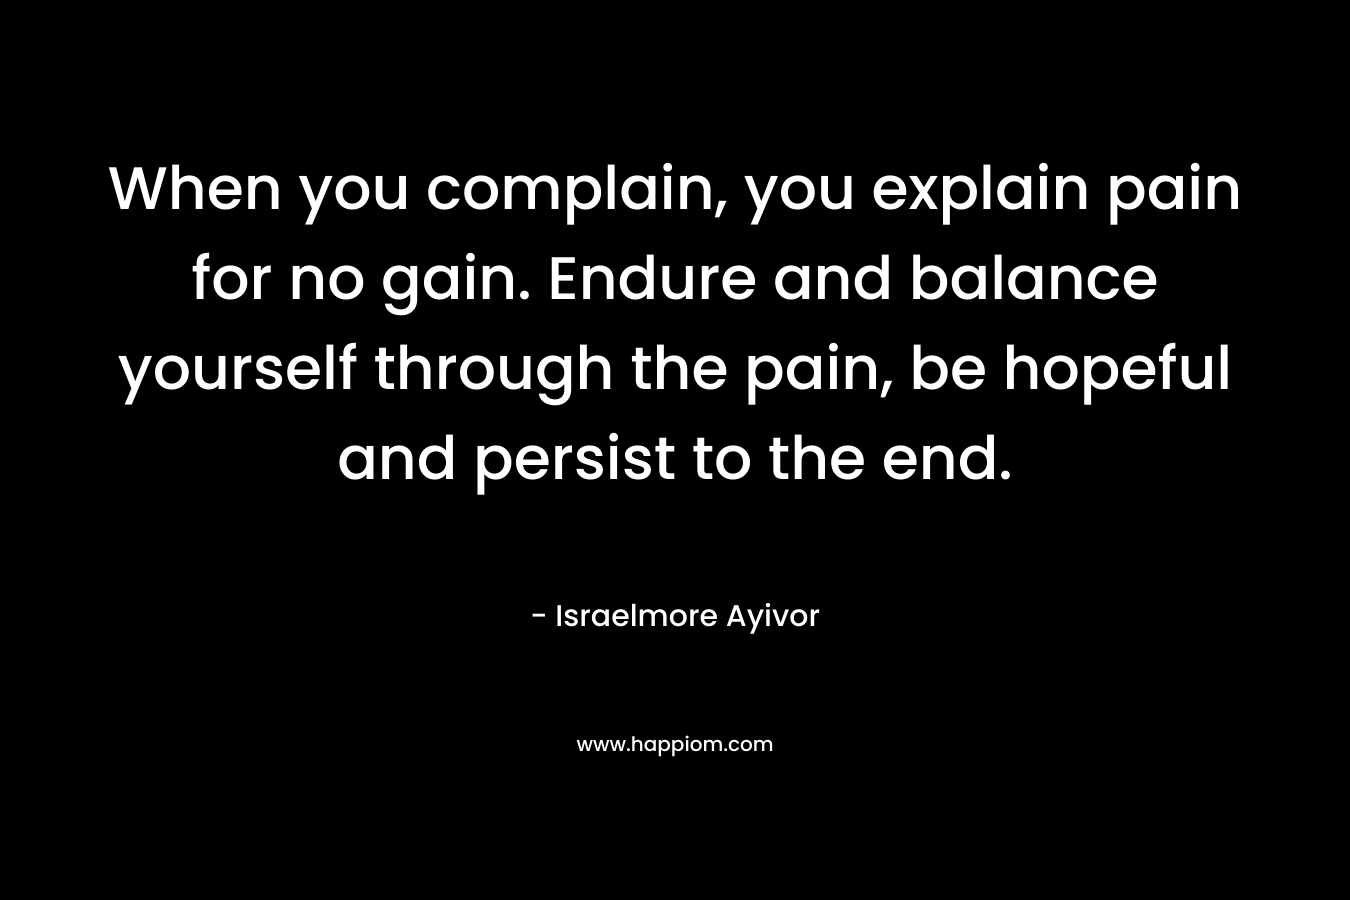 When you complain, you explain pain for no gain. Endure and balance yourself through the pain, be hopeful and persist to the end.